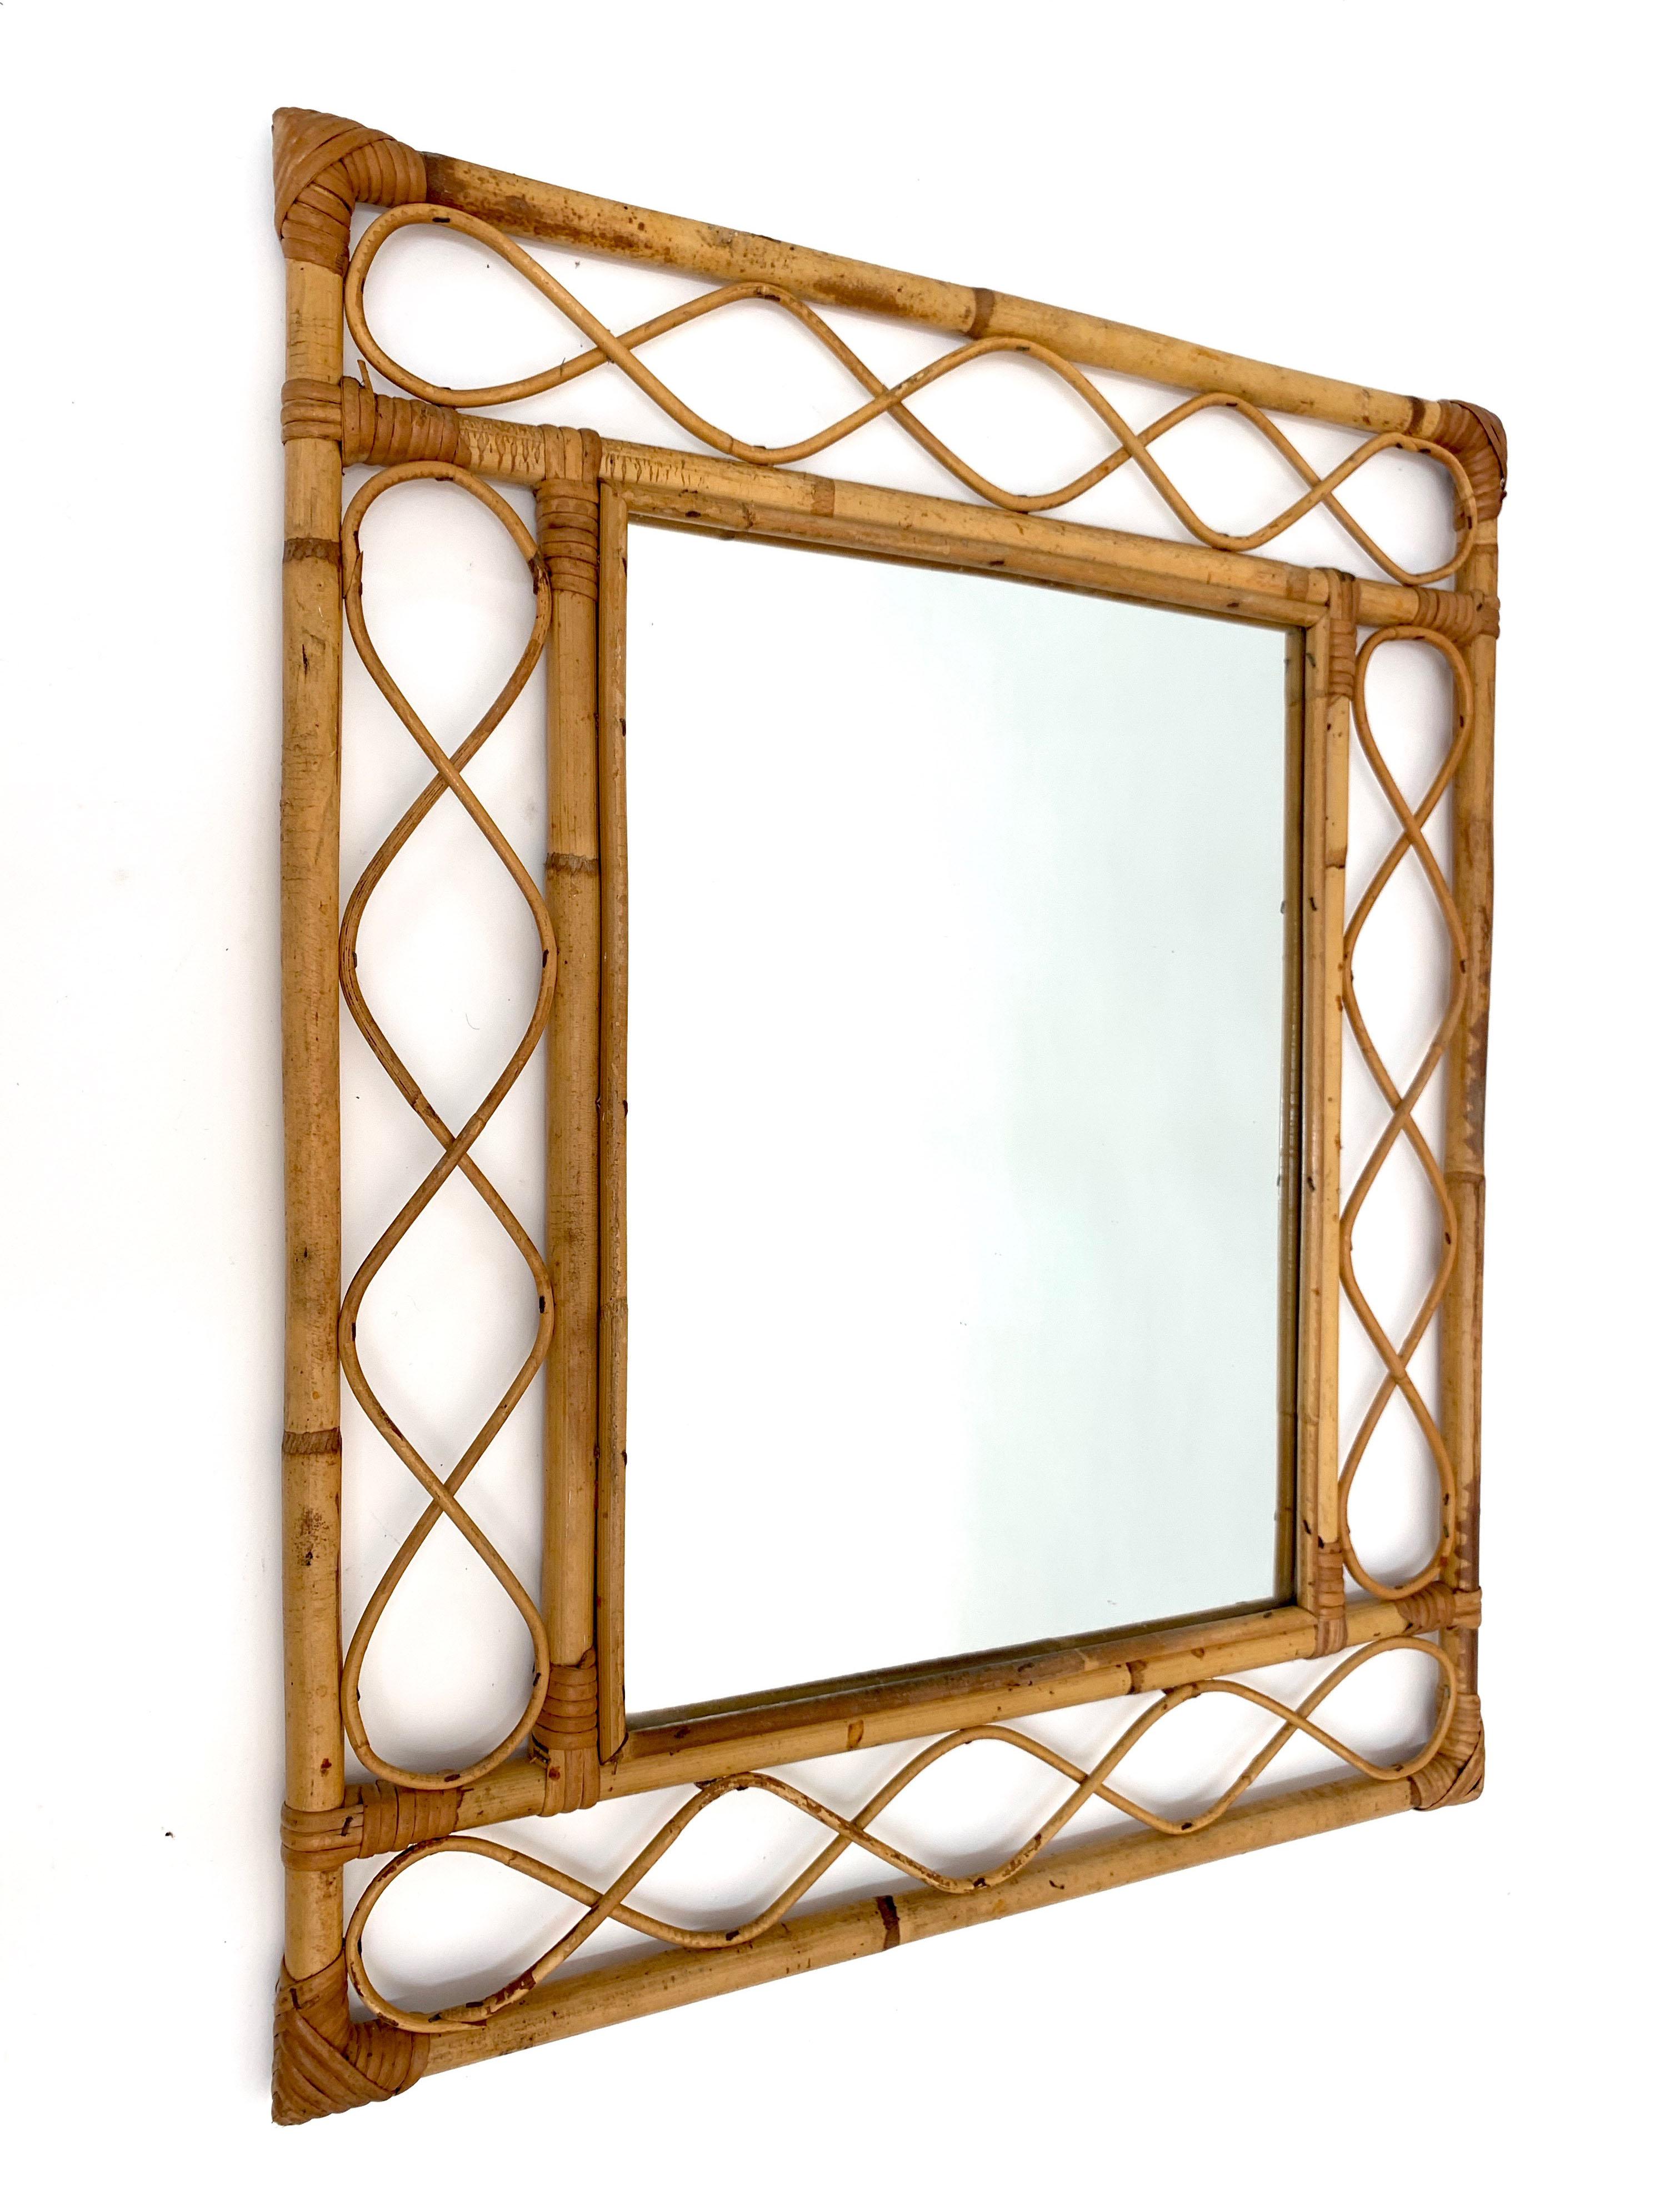 Mid-Century Modern Midcentury French Riviera Bamboo and Rattan Rectangular Wall Mirror France 1960s